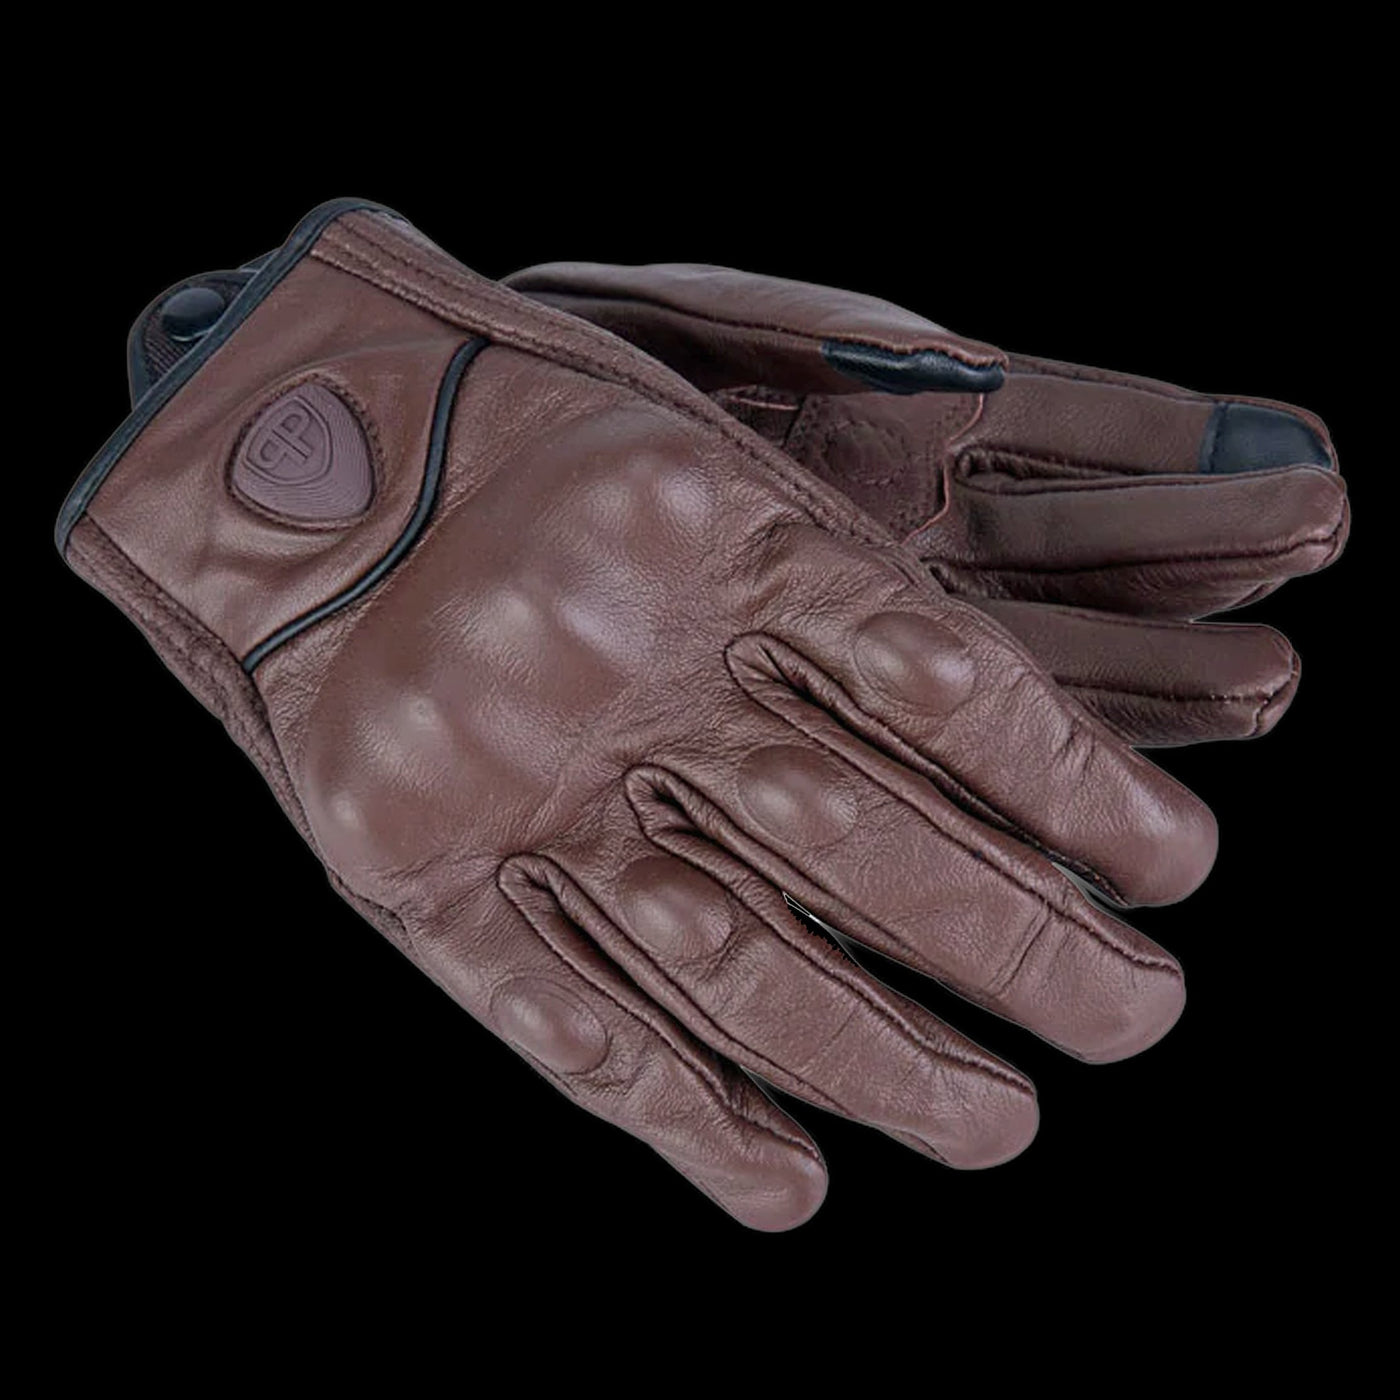 Touchscreen Leather Riding Gloves